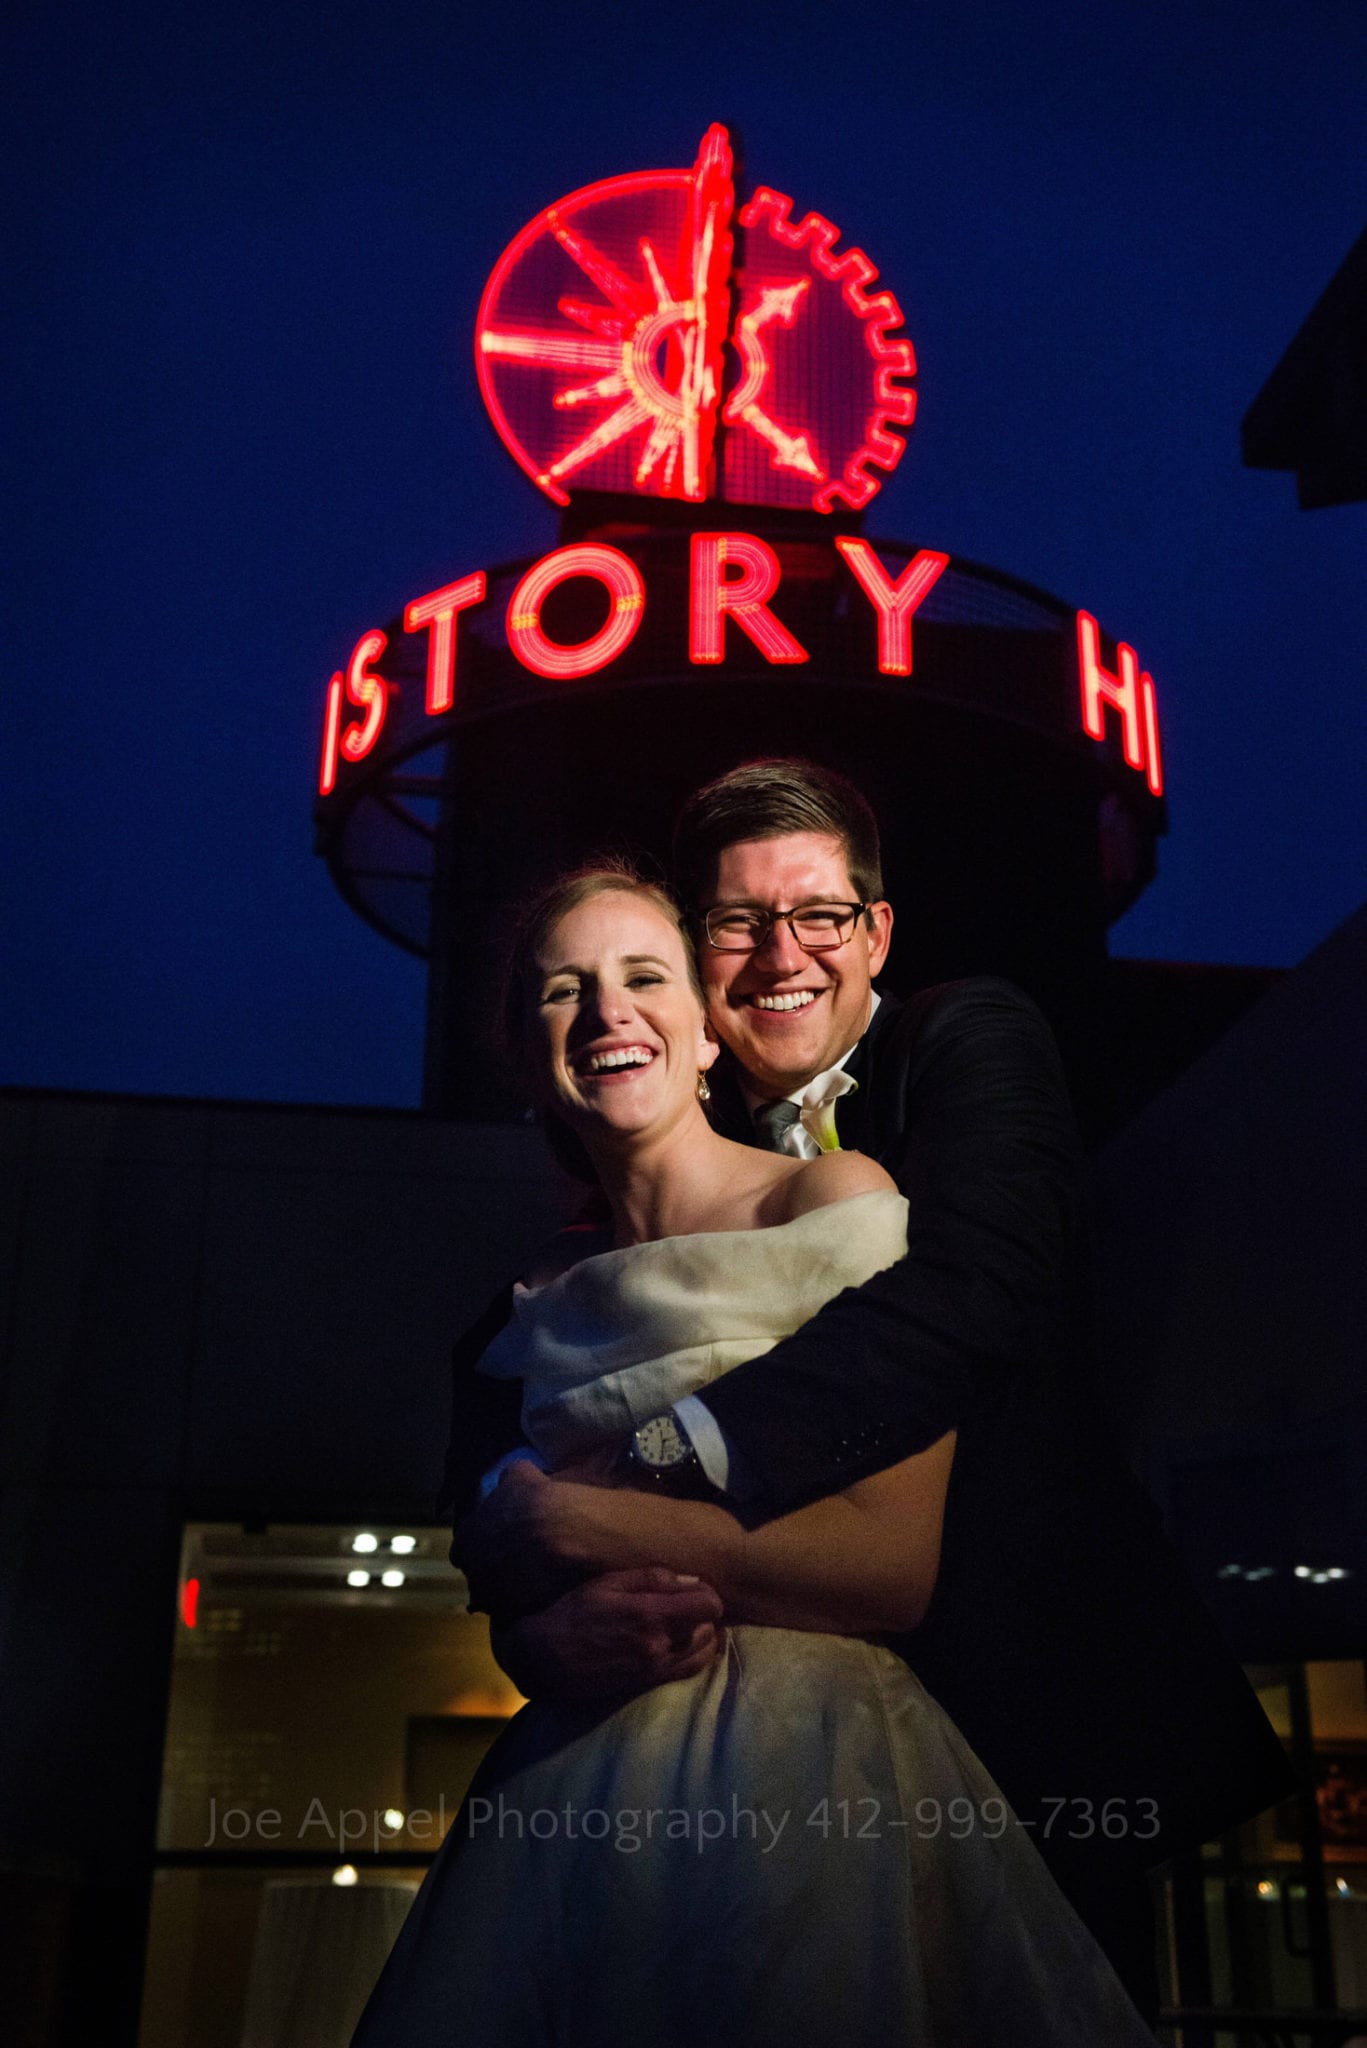 Bride and groom embrace and smile at the camera with the neon Heinz History Center sign above them in the twilight sky.